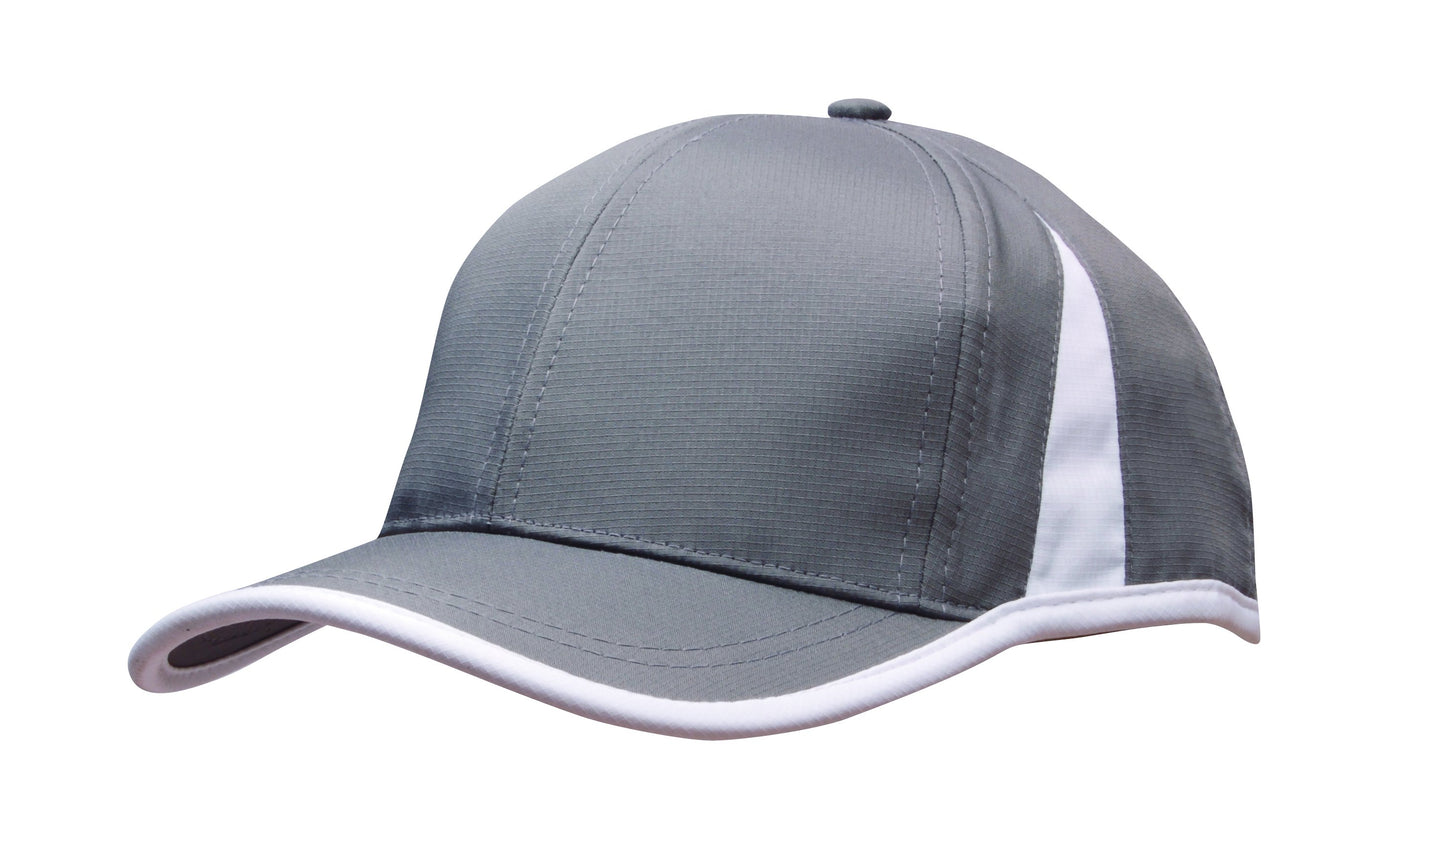 Headwear Sports Ripstop with Inserts and Trim (4004)